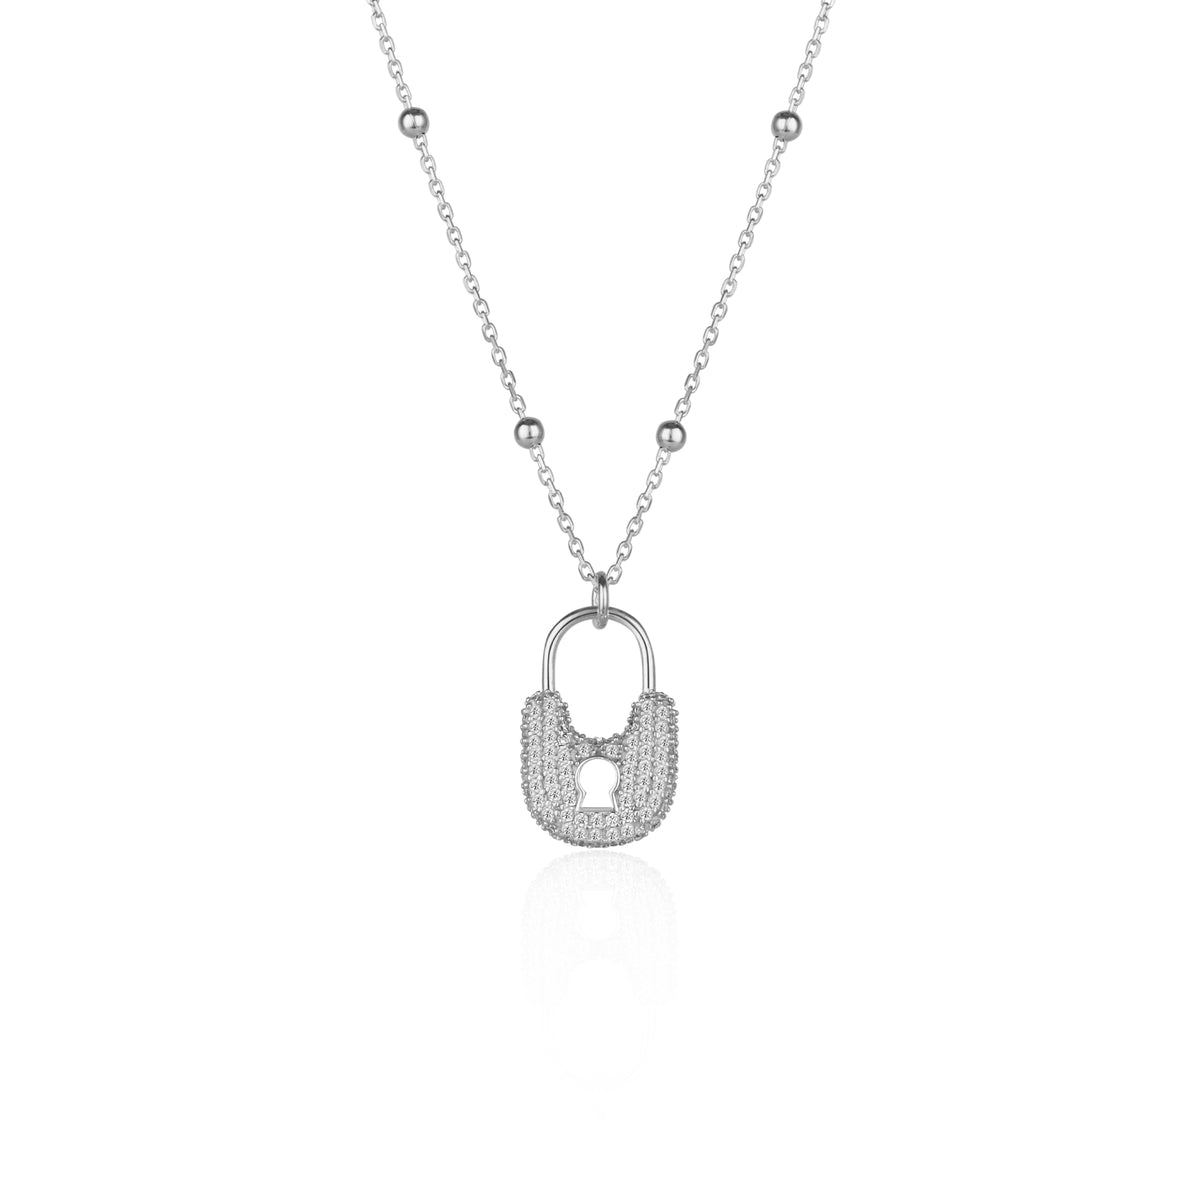 Lock Pendant Necklace With Beaded Chain Sterling Silver